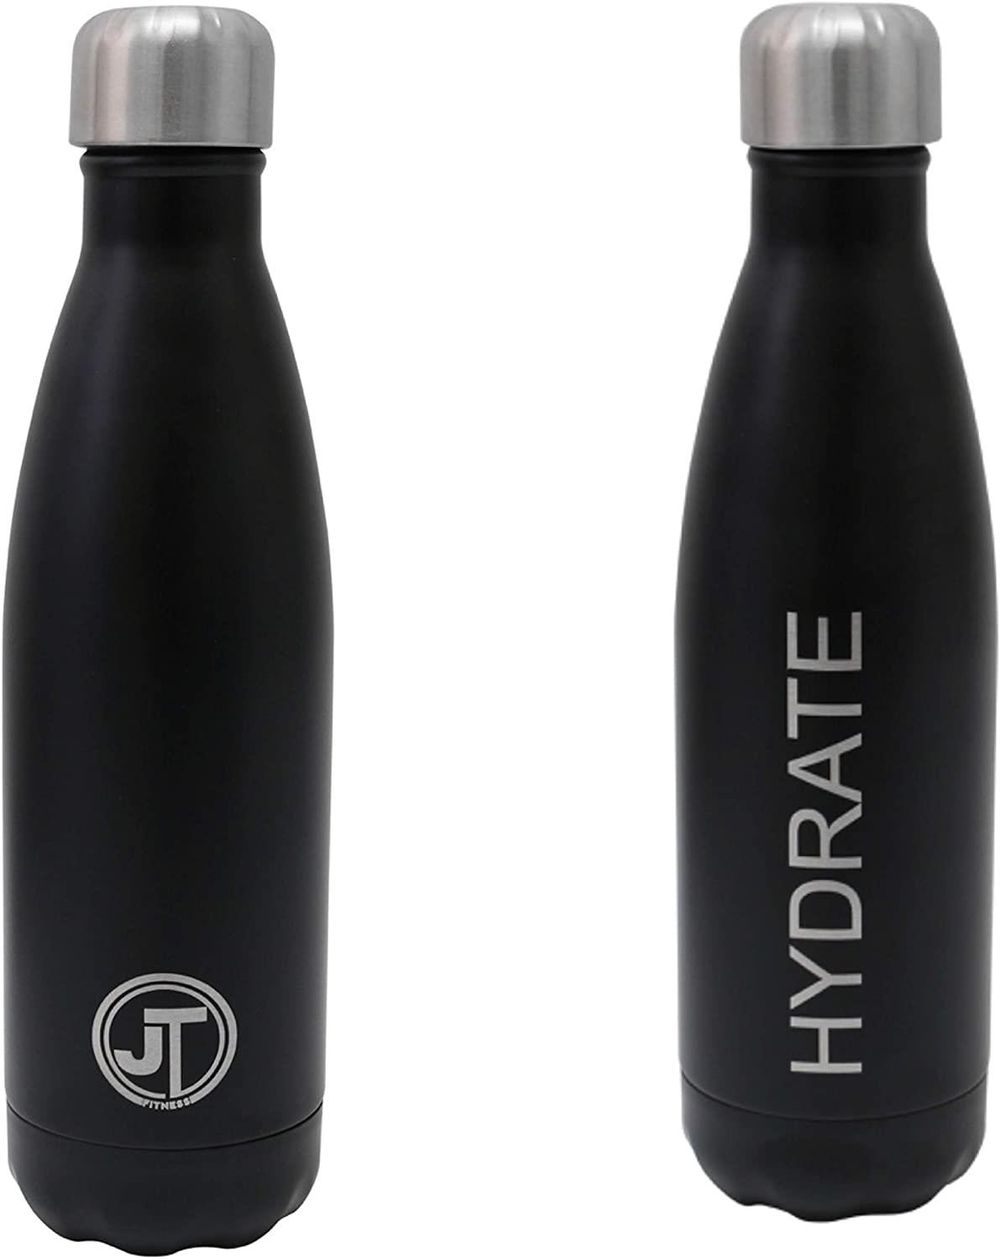 JTL Fitness Stainless Steel Water Bottle 500ml Vacuum Insulated Flask for Hot or Cold Metal Watertight Seal Black